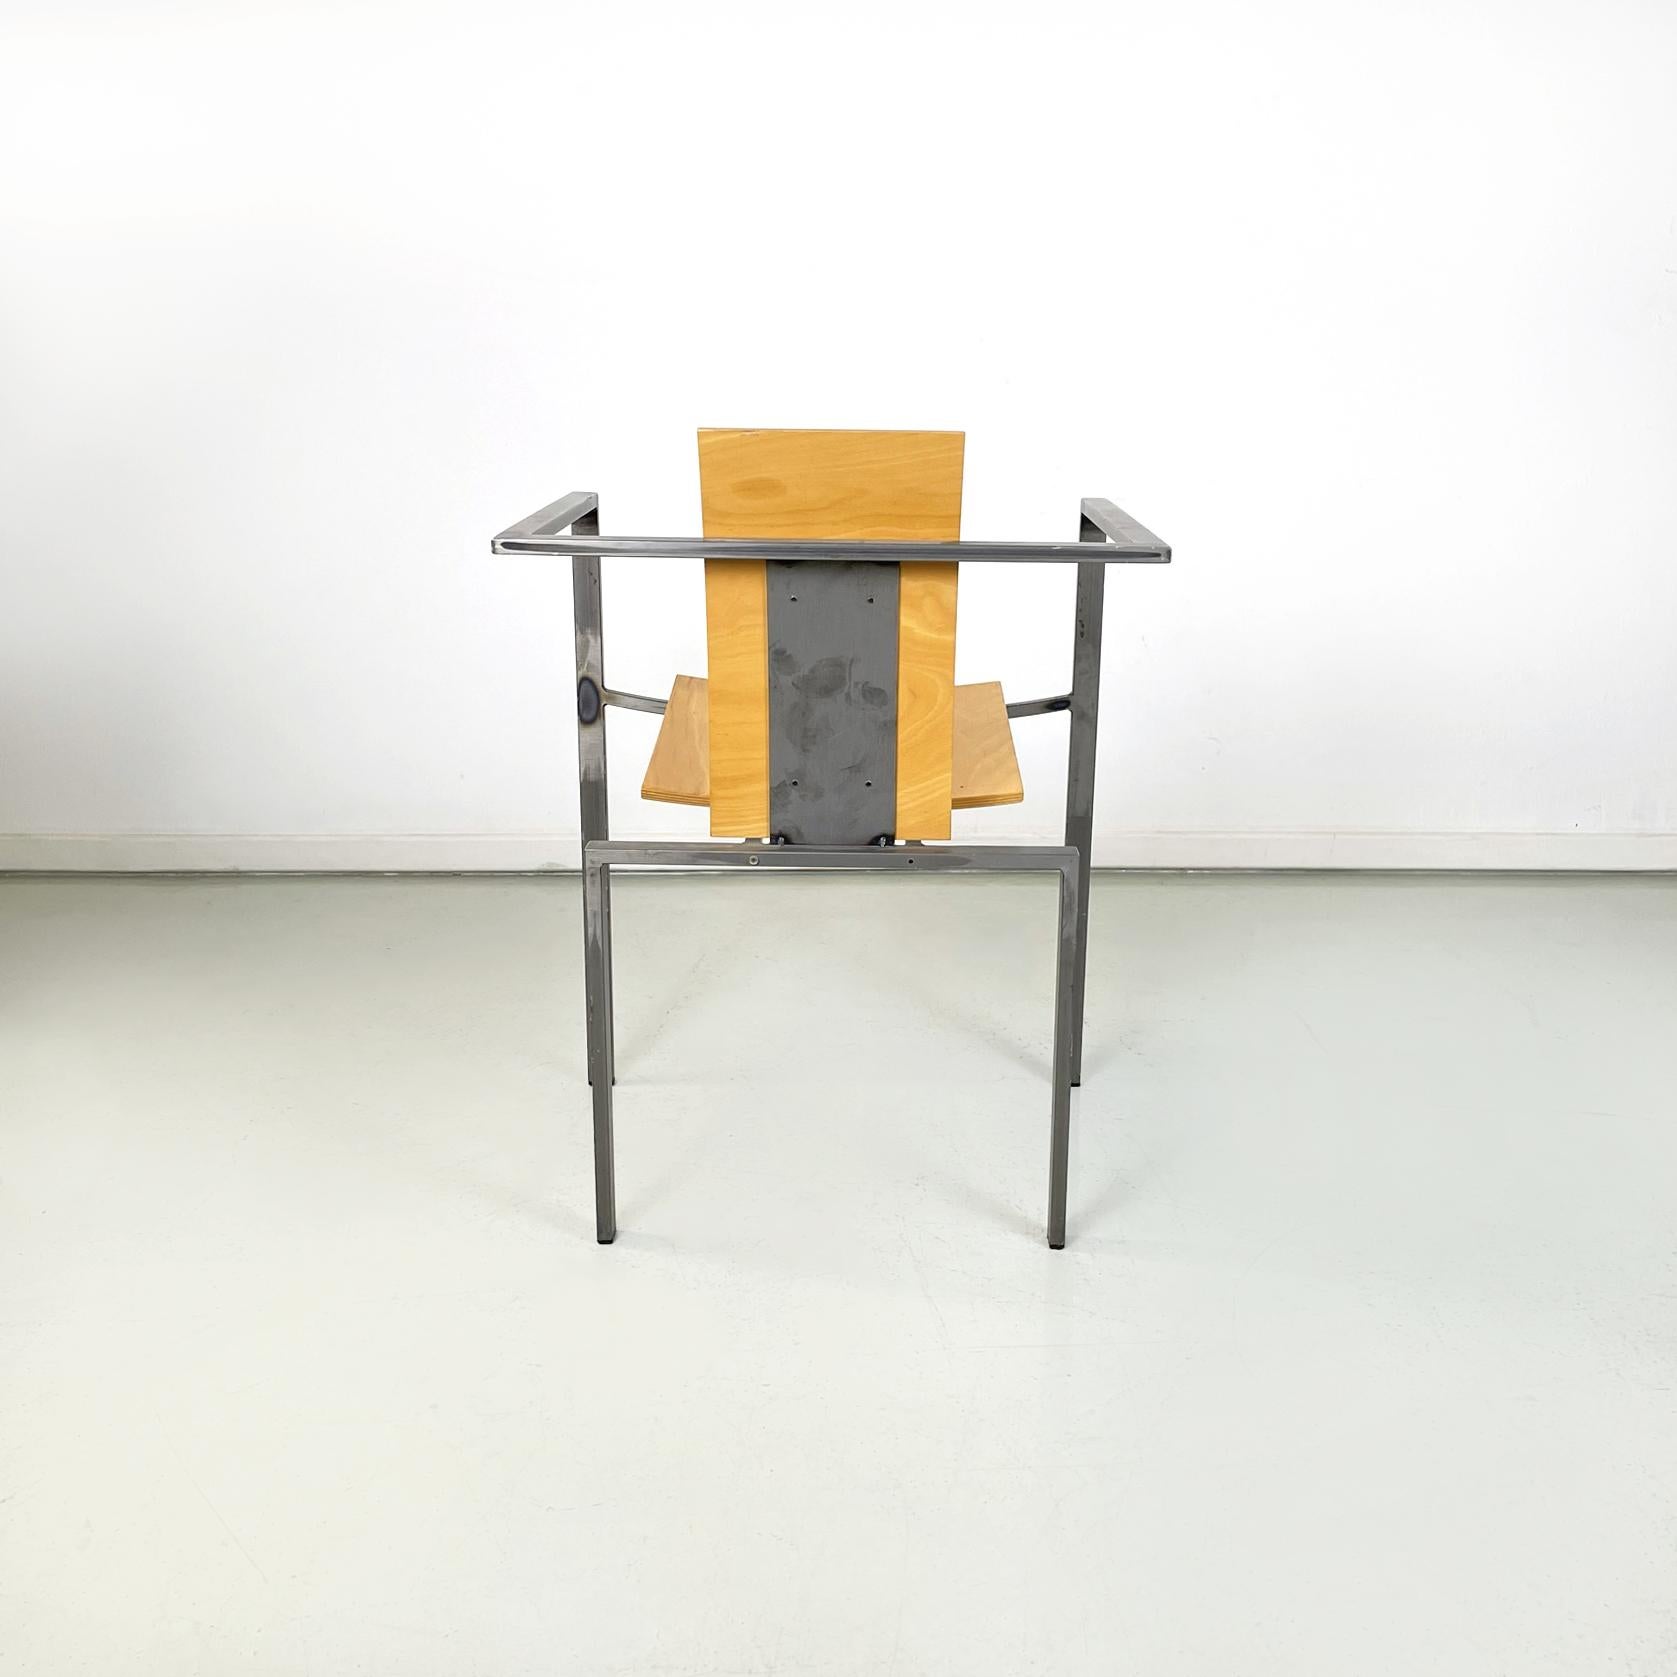 German Modern Squared Chair in Wood and Metal by Karl-Friedrich Foster KKF, 1980 For Sale 1